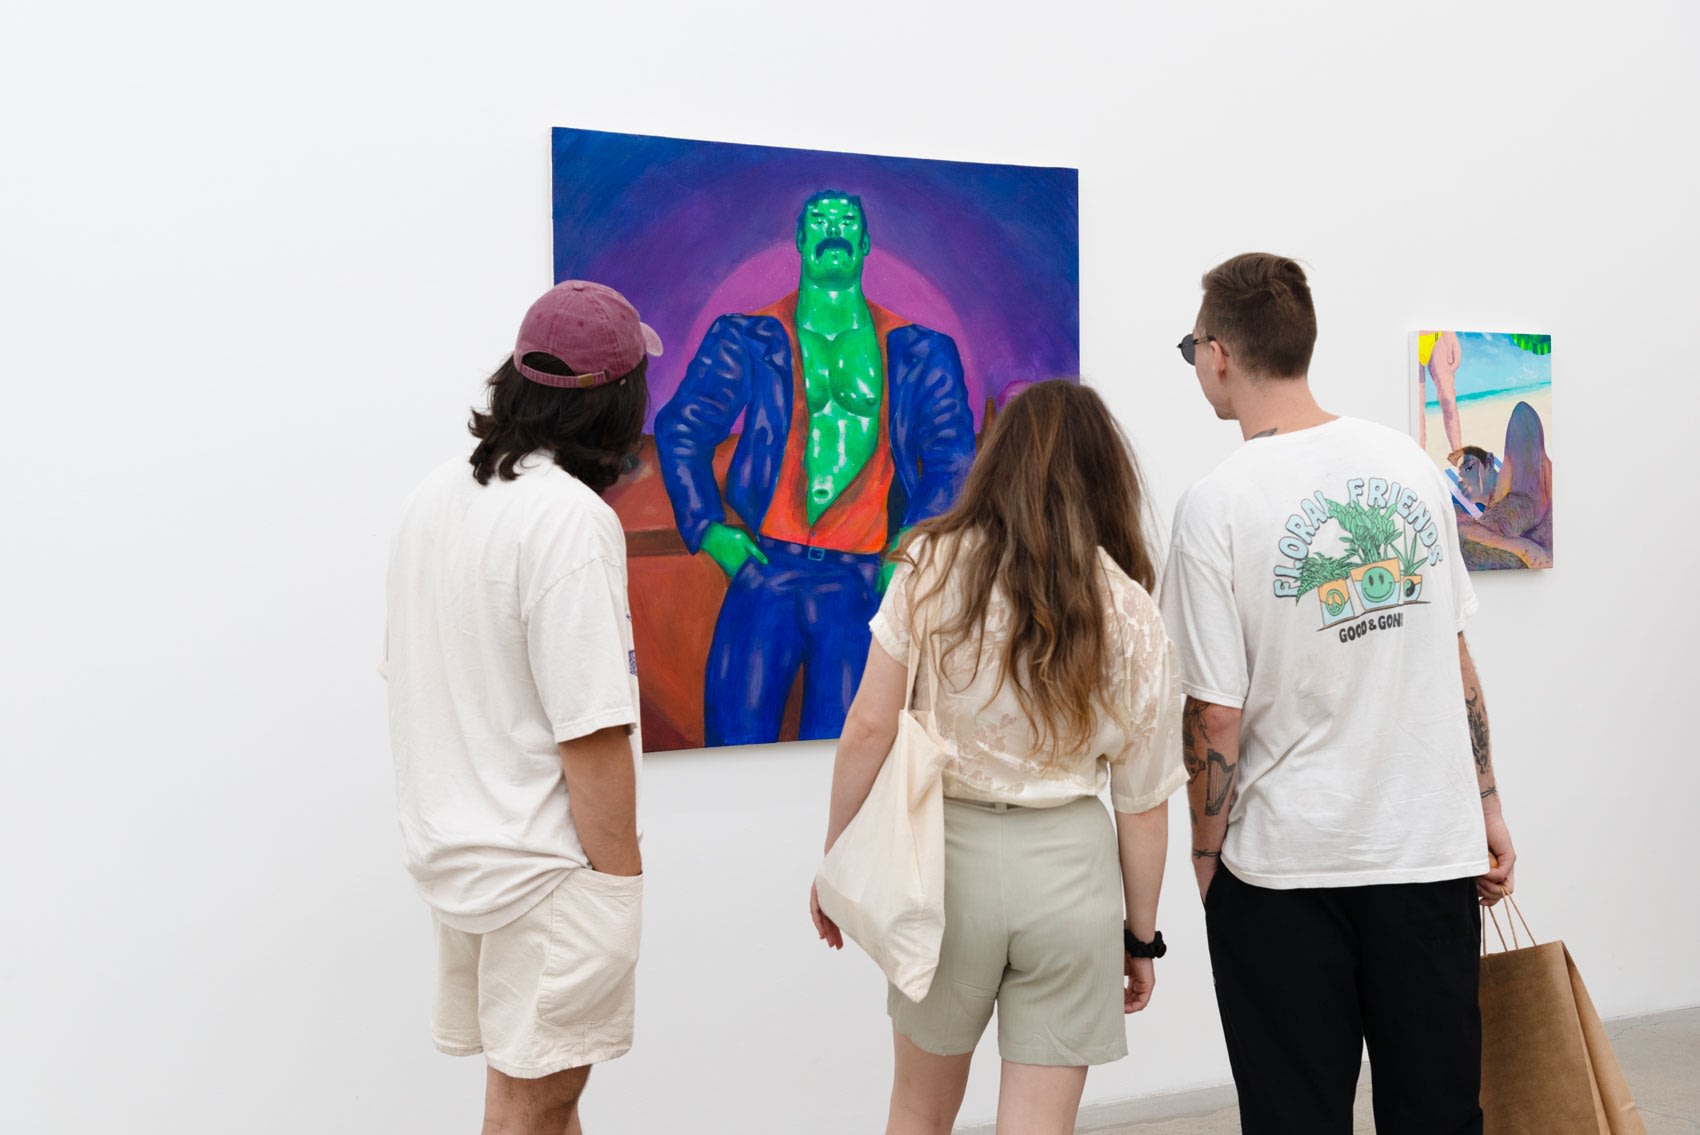 Three young people look at a bright blue, green, and purple painting in a gallery.